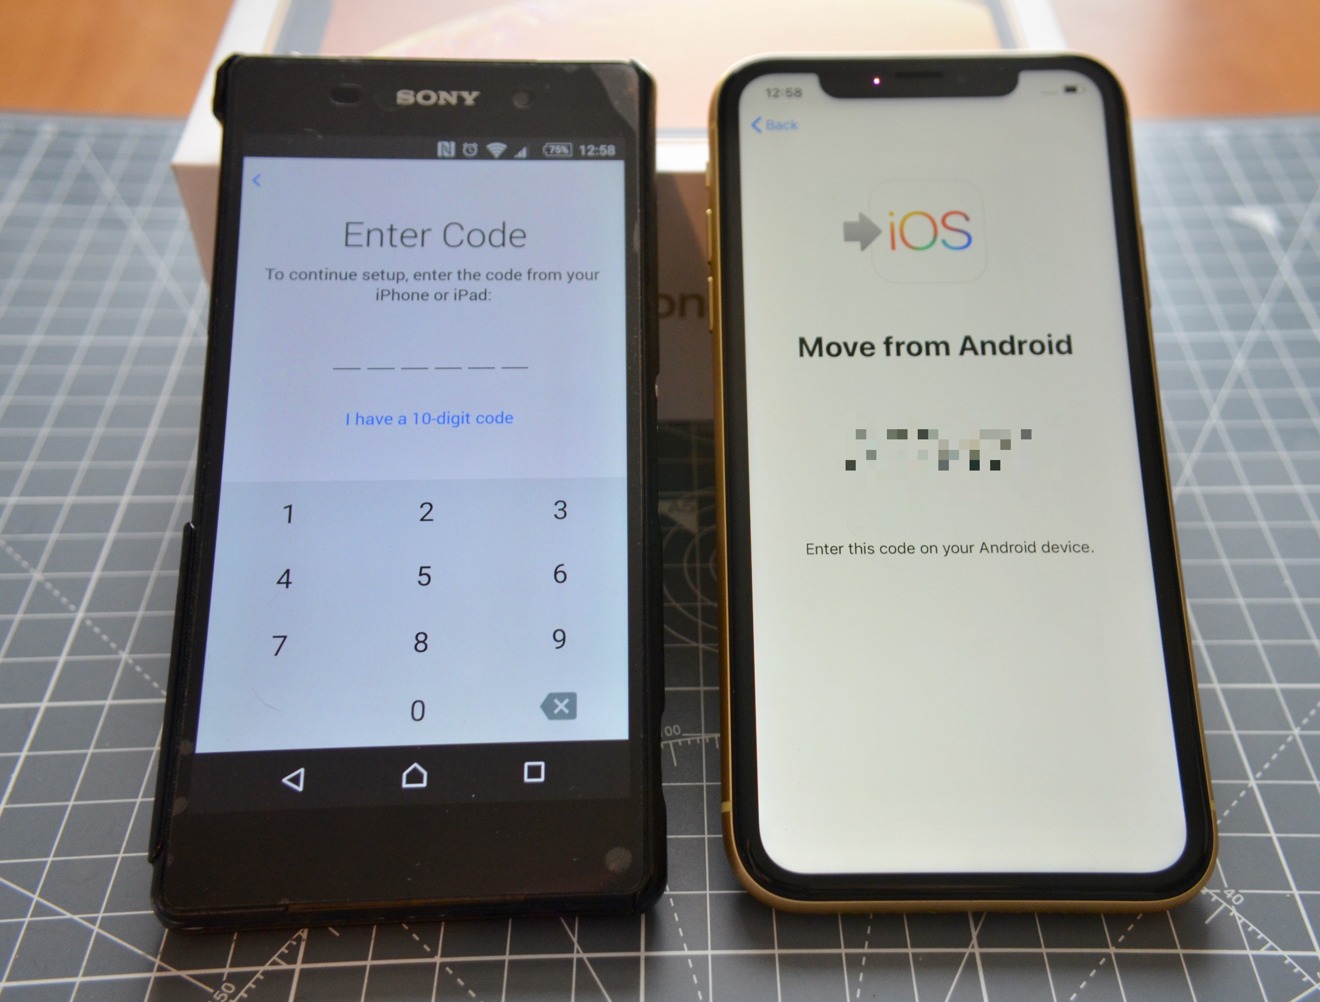 The iPhone provides a code to enter into the Android smartphone